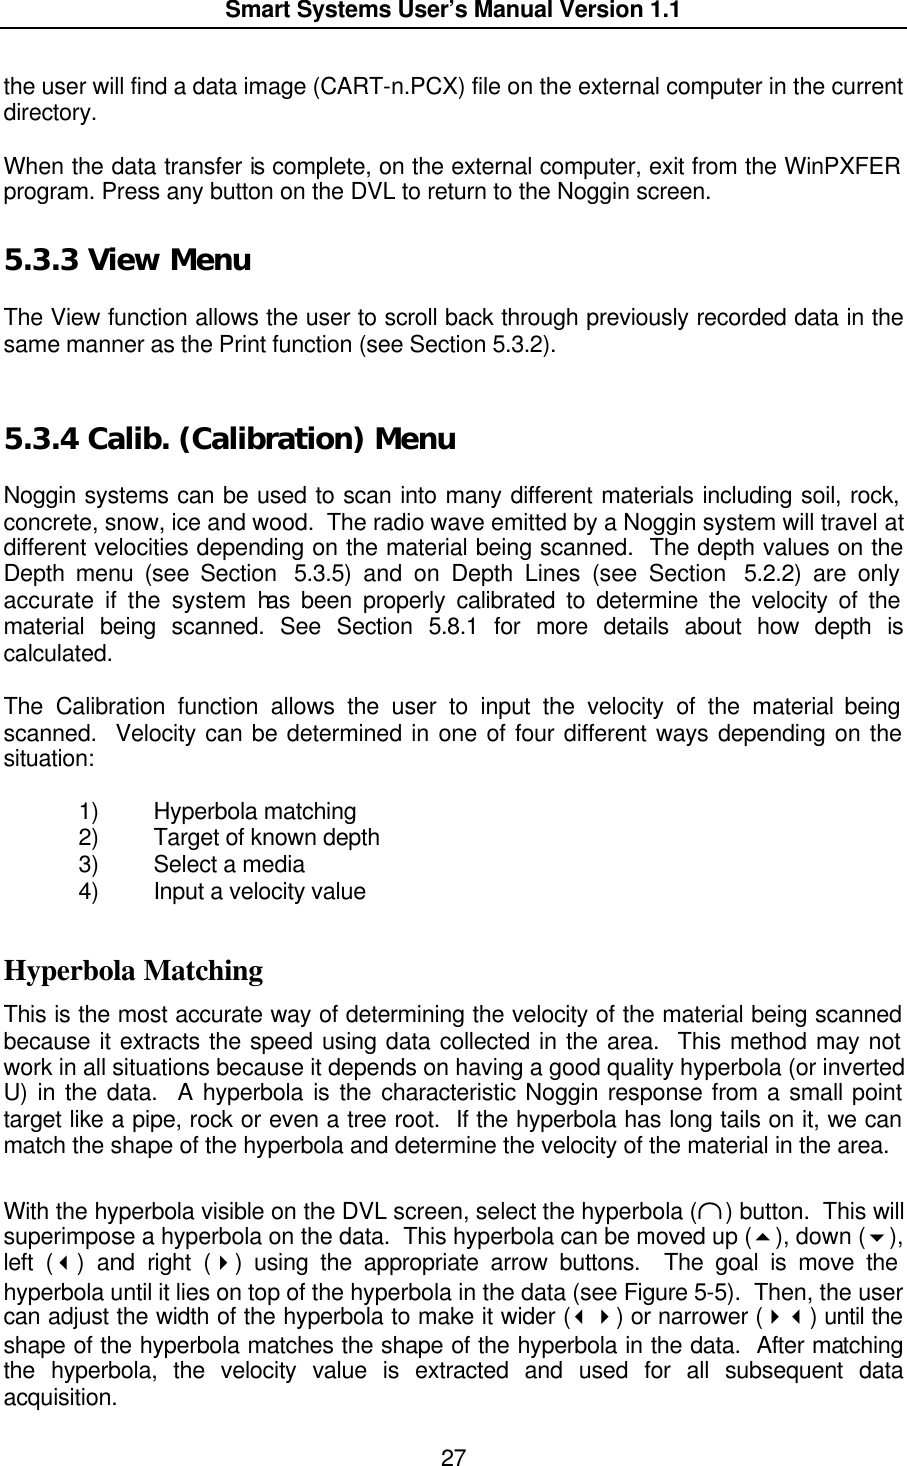  Smart Systems User’s Manual Version 1.1  27  the user will find a data image (CART-n.PCX) file on the external computer in the current directory.  When the data transfer is complete, on the external computer, exit from the WinPXFER program. Press any button on the DVL to return to the Noggin screen. 5.3.3  View Menu  The View function allows the user to scroll back through previously recorded data in the same manner as the Print function (see Section 5.3.2).   5.3.4  Calib. (Calibration) Menu  Noggin systems can be used to scan into many different materials including soil, rock, concrete, snow, ice and wood.  The radio wave emitted by a Noggin system will travel at different velocities depending on the material being scanned.  The depth values on the Depth menu (see Section  5.3.5) and on Depth Lines (see Section  5.2.2) are only accurate if the system has been properly calibrated to determine the velocity of the material being scanned. See Section 5.8.1 for more details about how depth is calculated.  The Calibration function allows the user to input the velocity of the material being scanned.  Velocity can be determined in one of four different ways depending on the situation:  1) Hyperbola matching 2) Target of known depth 3) Select a media 4) Input a velocity value  Hyperbola Matching This is the most accurate way of determining the velocity of the material being scanned because it extracts the speed using data collected in the area.  This method may not work in all situations because it depends on having a good quality hyperbola (or inverted U) in the data.  A hyperbola is the characteristic Noggin response from a small point target like a pipe, rock or even a tree root.  If the hyperbola has long tails on it, we can match the shape of the hyperbola and determine the velocity of the material in the area.  With the hyperbola visible on the DVL screen, select the hyperbola (∩) button.  This will superimpose a hyperbola on the data.  This hyperbola can be moved up (5), down (6), left (3) and right (4) using the appropriate arrow buttons.  The goal is move the hyperbola until it lies on top of the hyperbola in the data (see Figure 5-5).  Then, the user can adjust the width of the hyperbola to make it wider (34) or narrower (43) until the shape of the hyperbola matches the shape of the hyperbola in the data.  After matching the hyperbola, the velocity value is extracted and used for all subsequent data acquisition. 